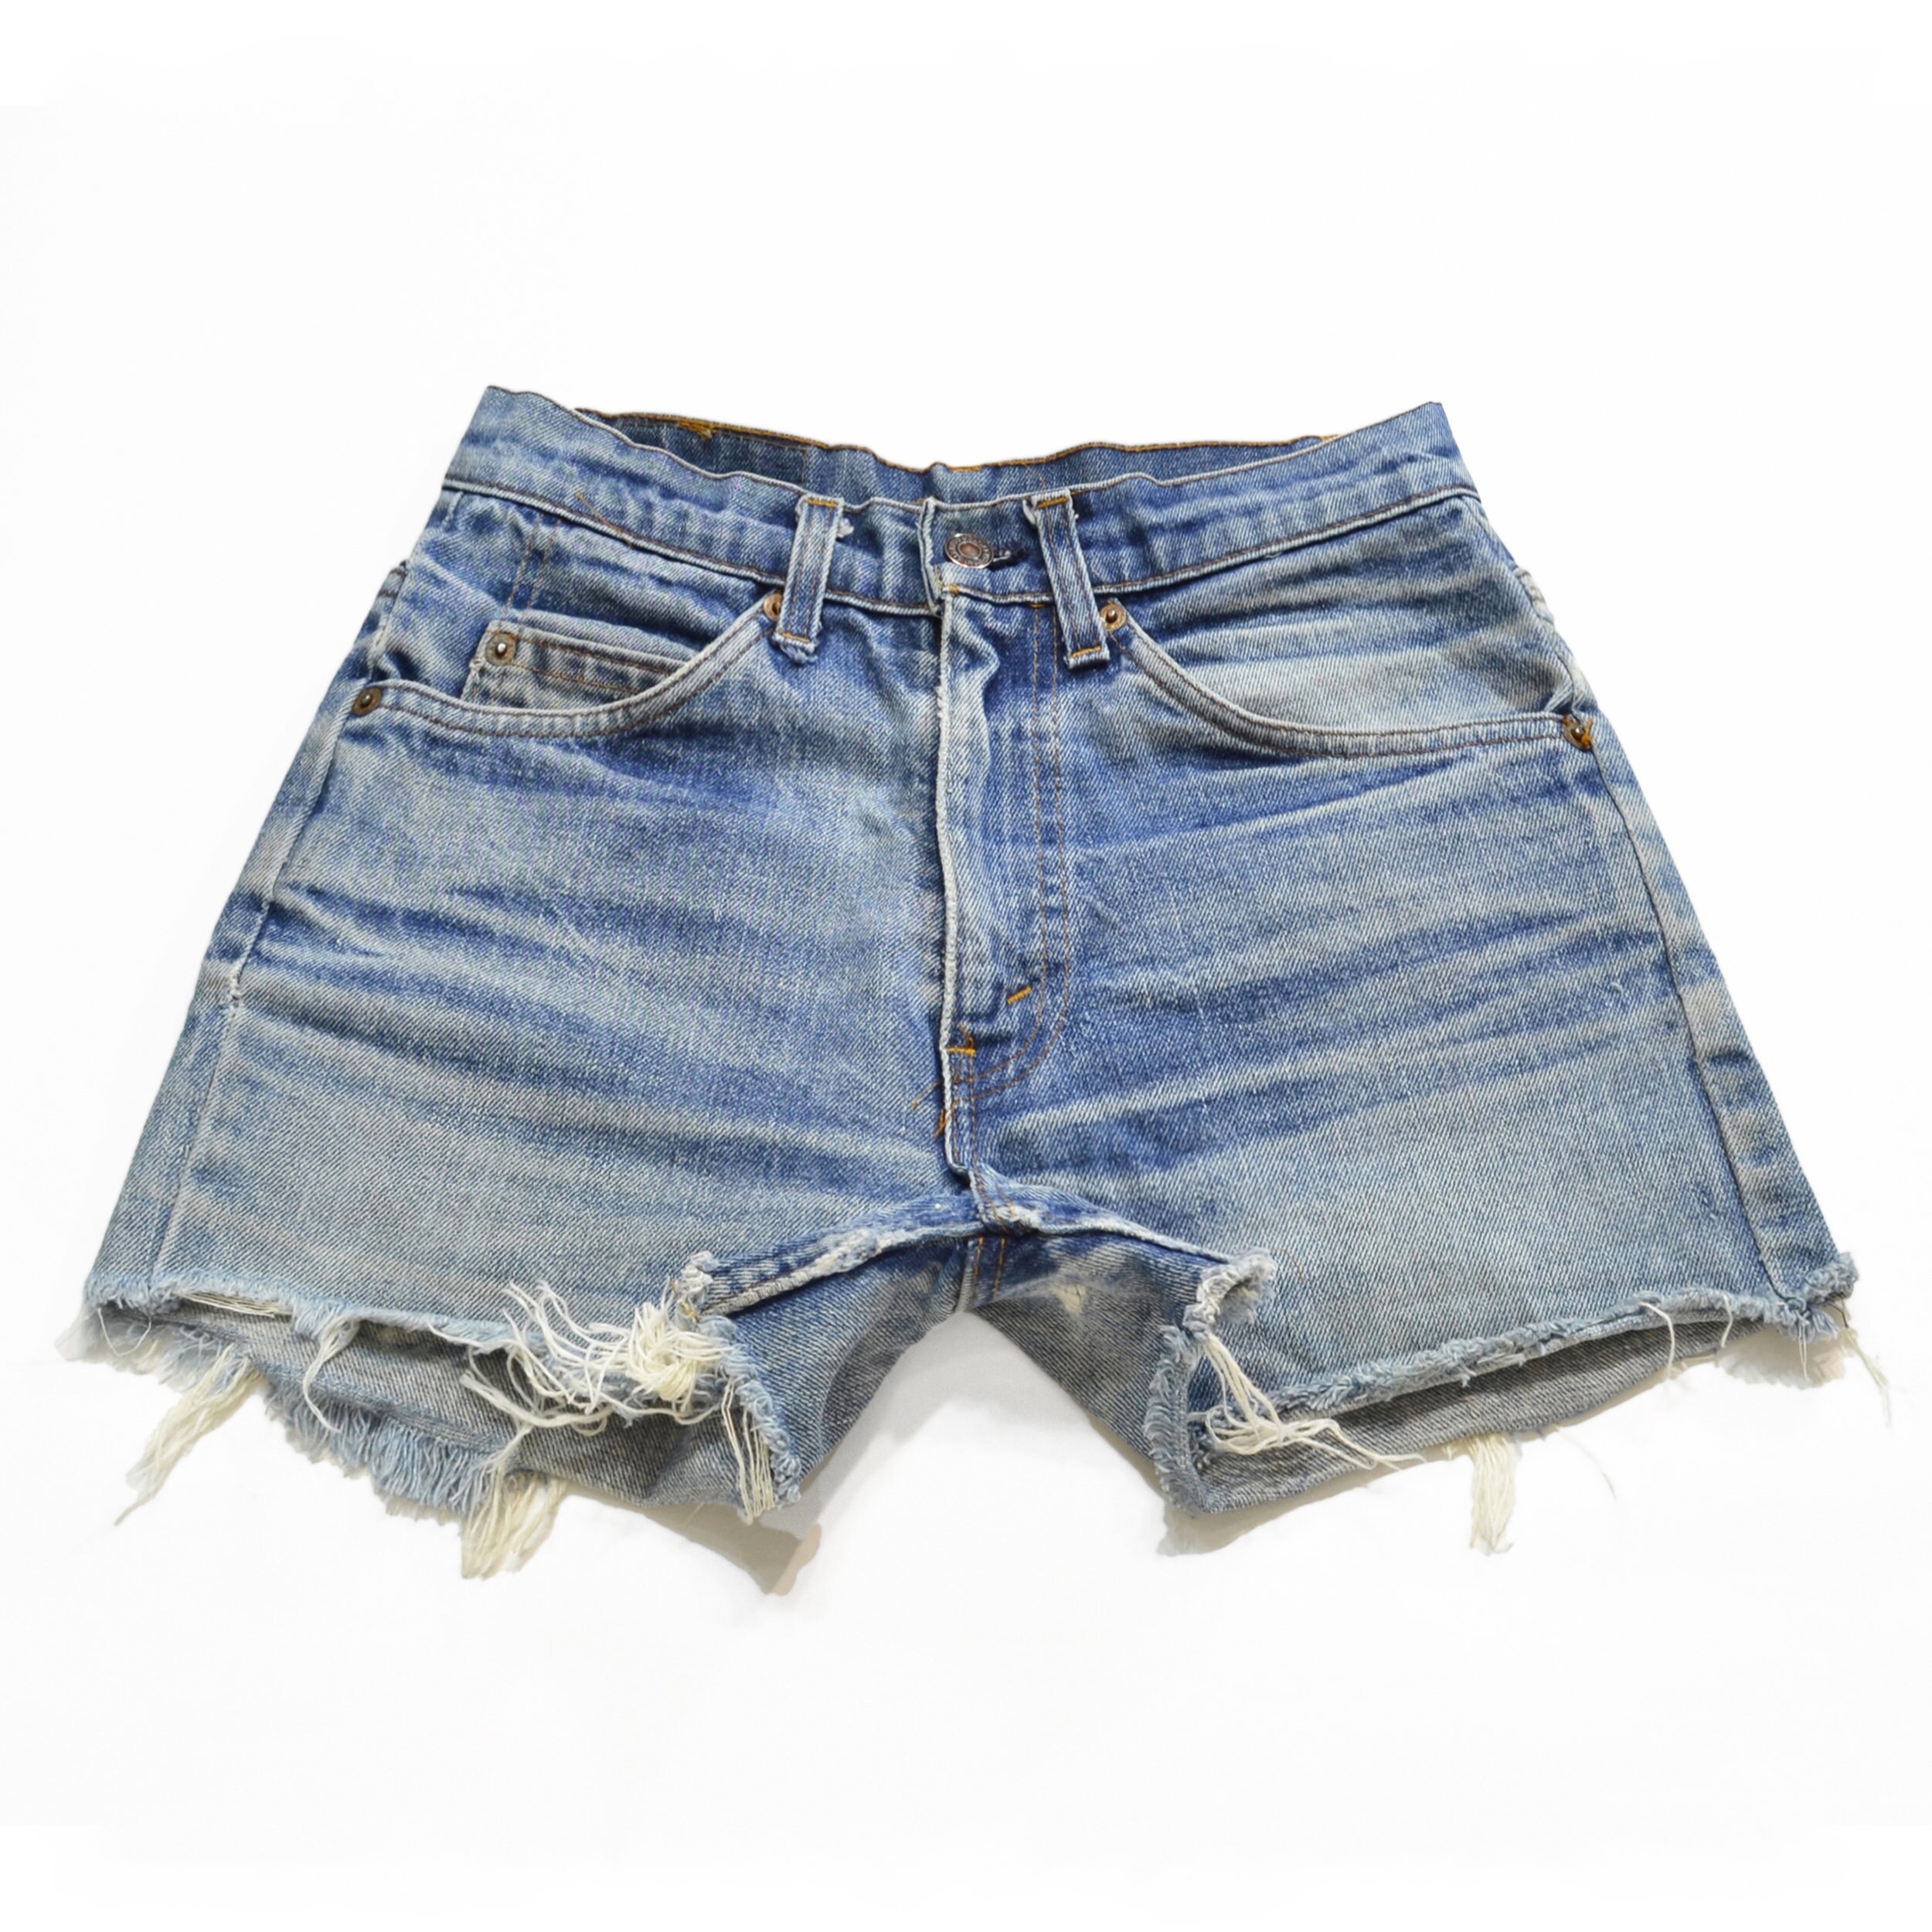 Stretchy Mid Waist Denim Shorts For Women Casual Petite Shorts